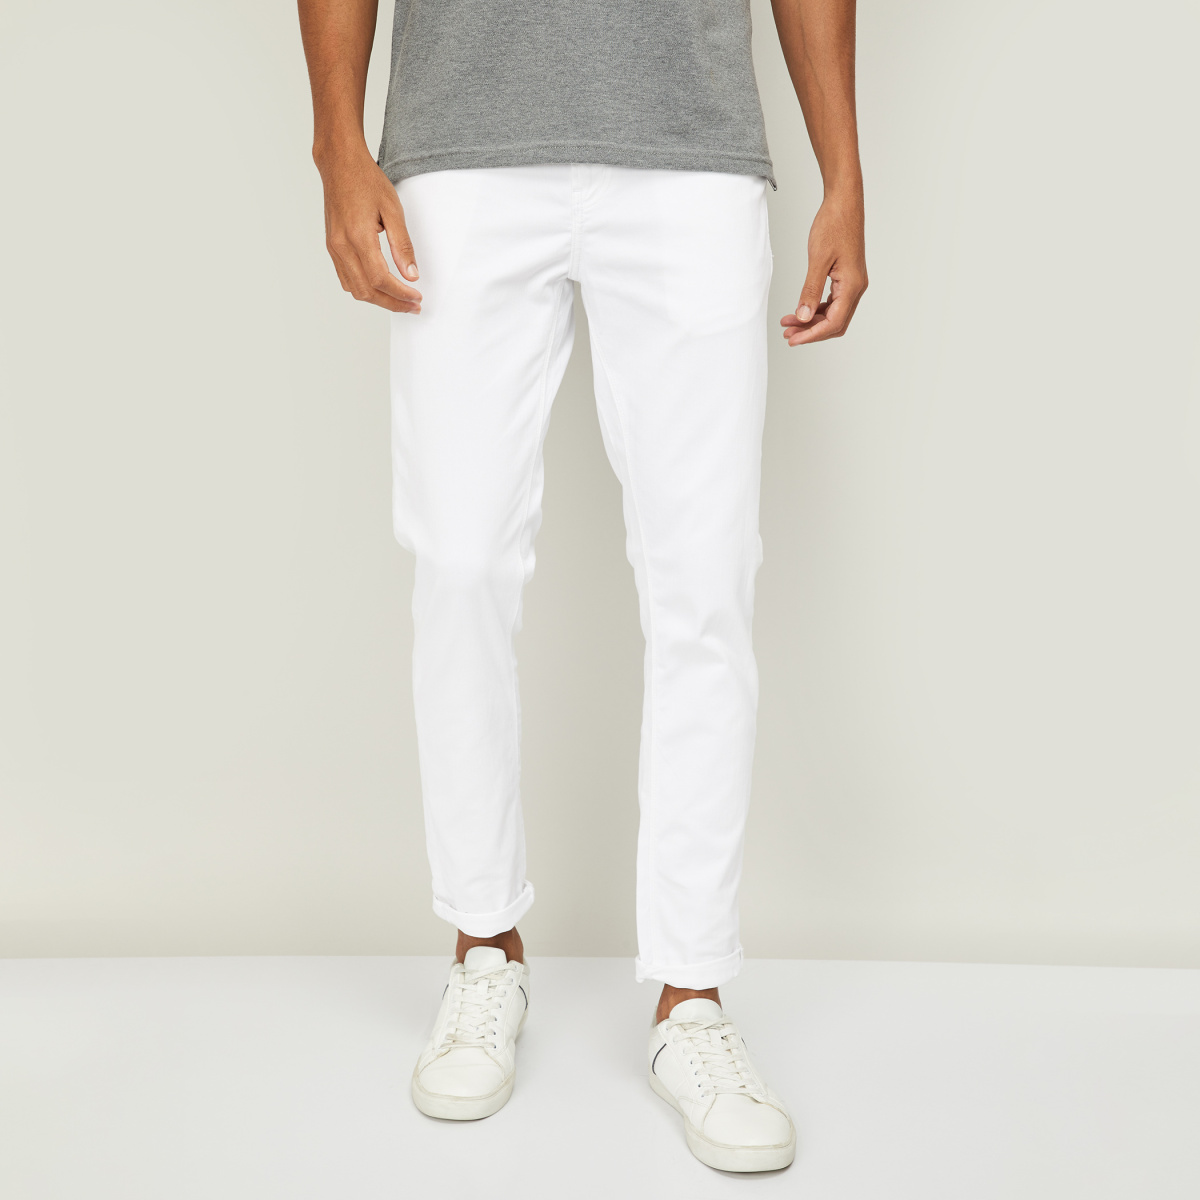 UNITED COLORS OF BENETTON Men Solid Skinny Fit Jeans